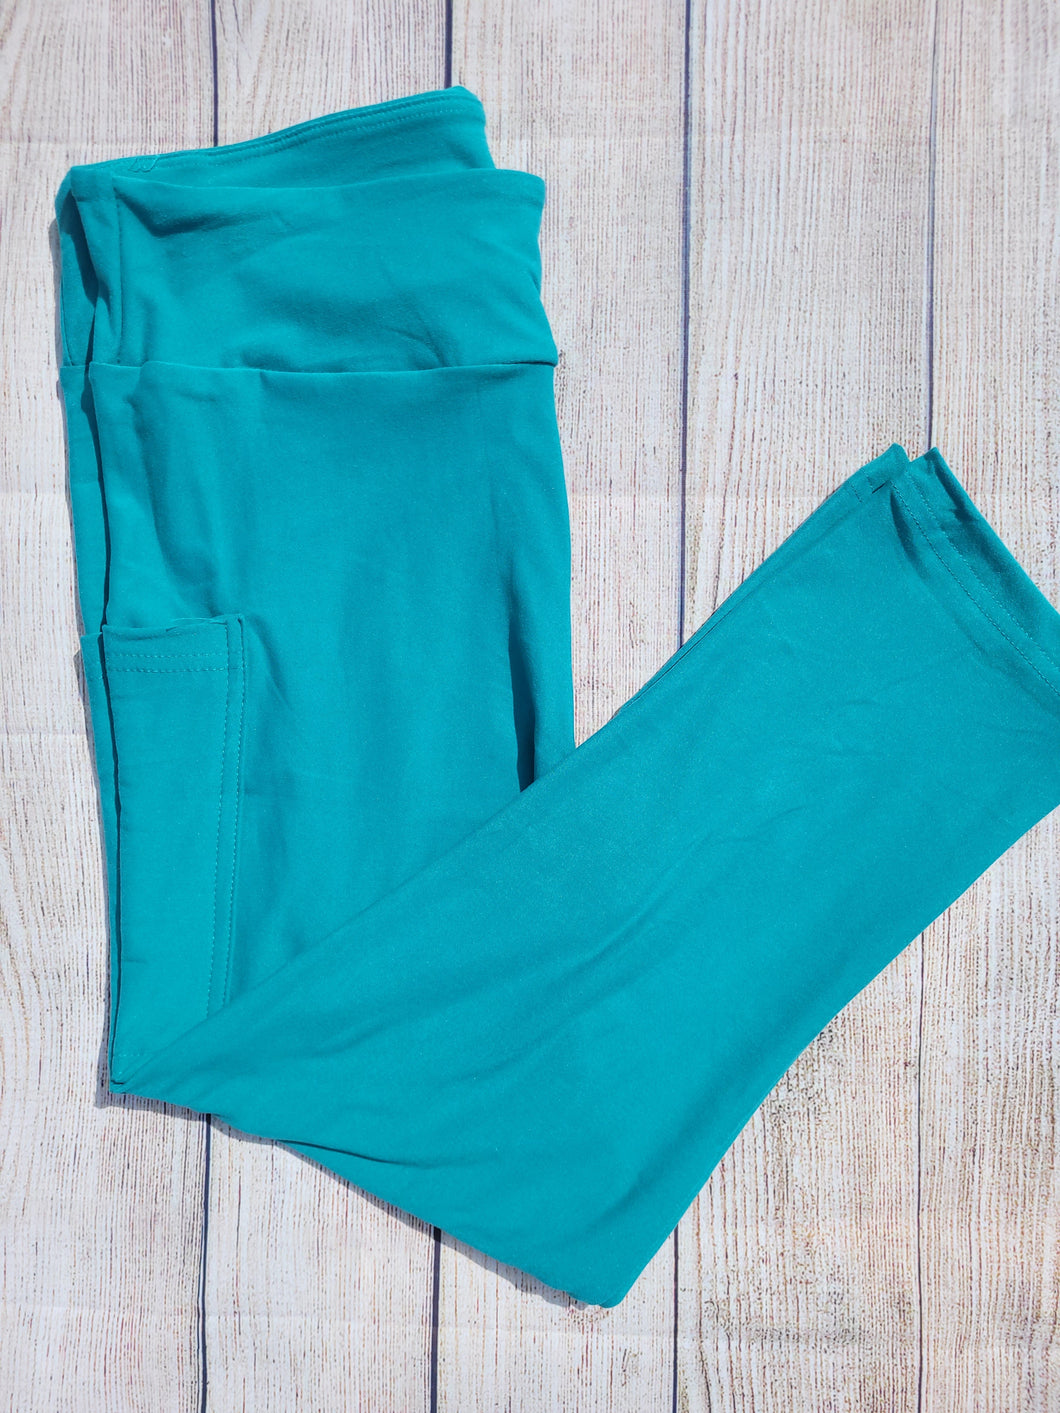 Light Teal capris and shorts with pockets